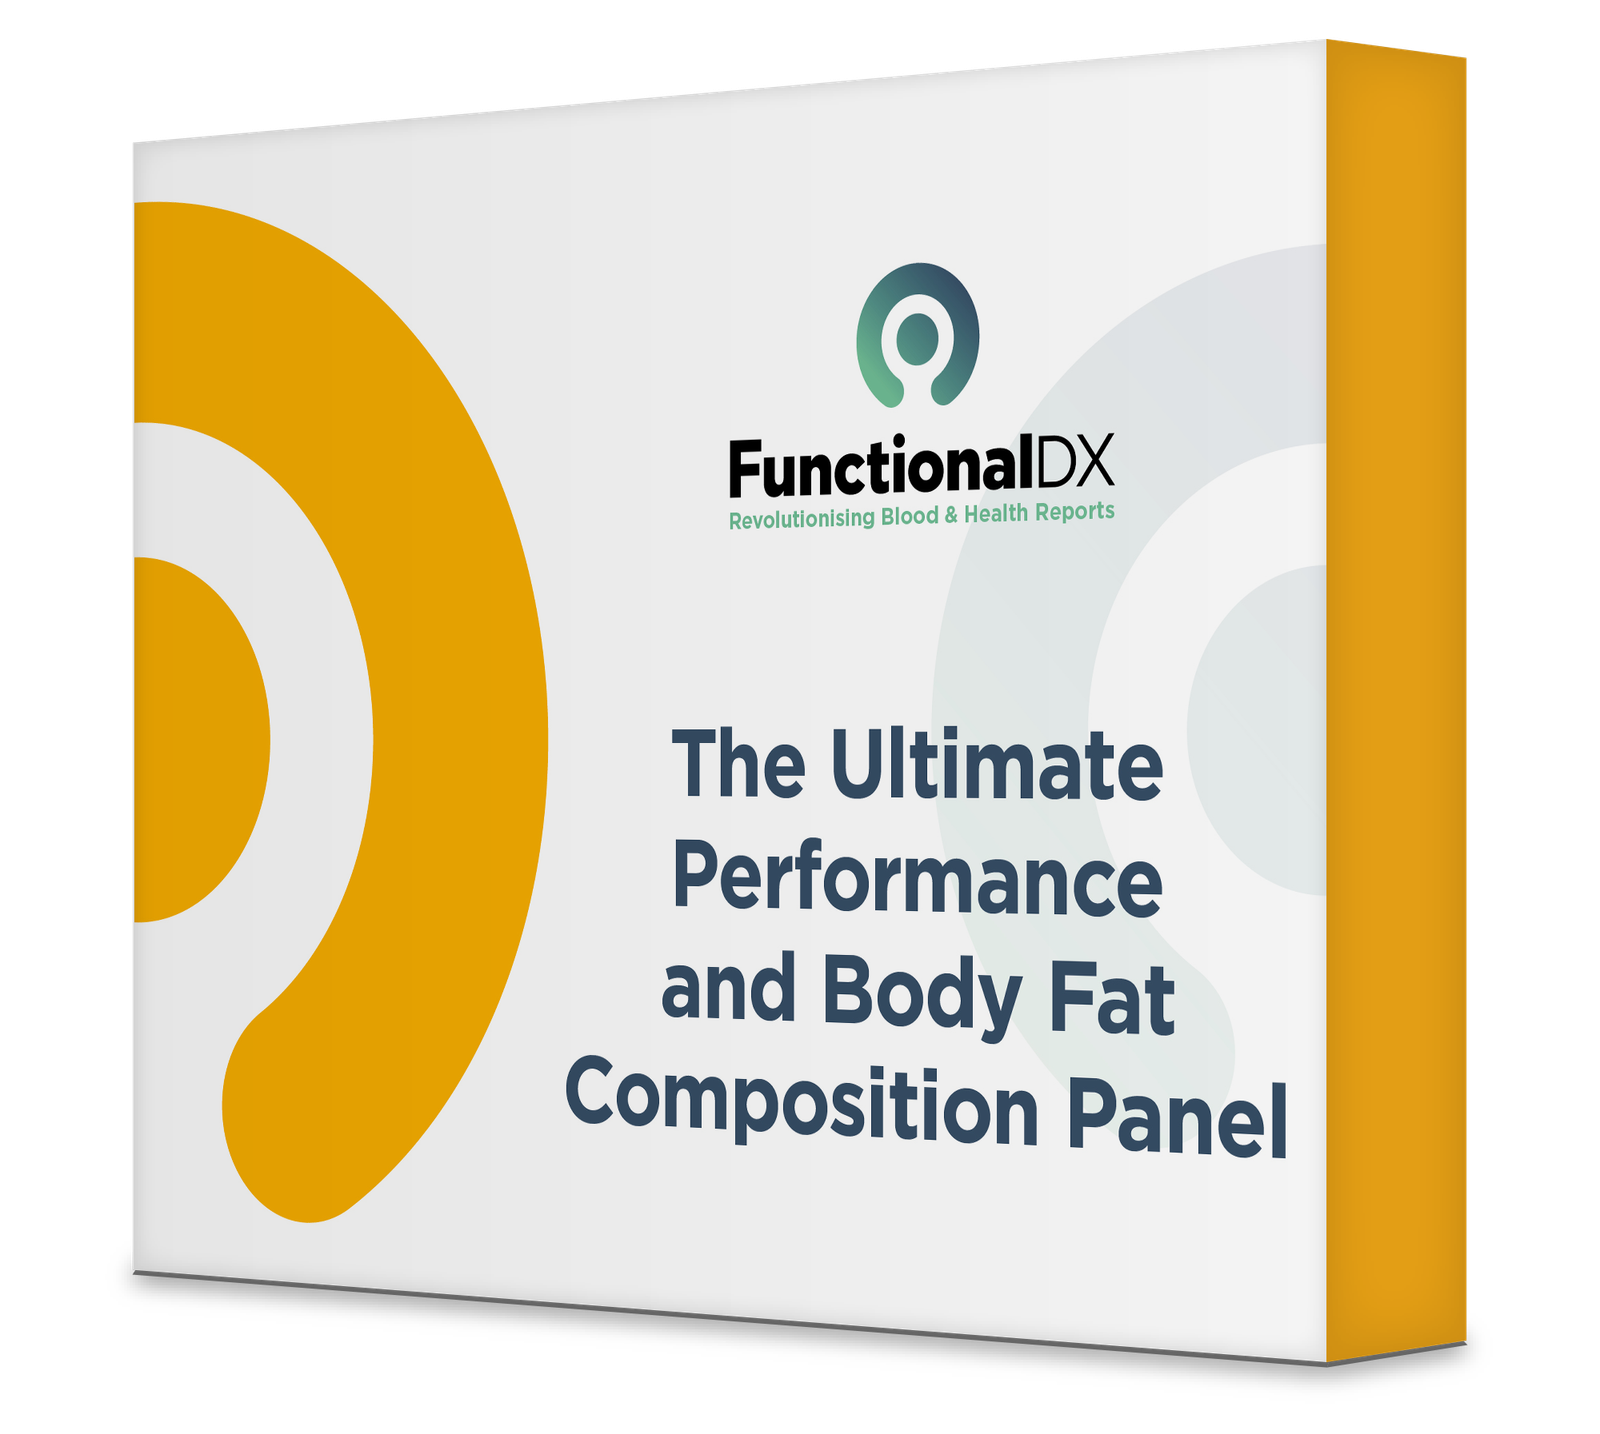 The Ultimate Performance and Body Fat Composition Panel